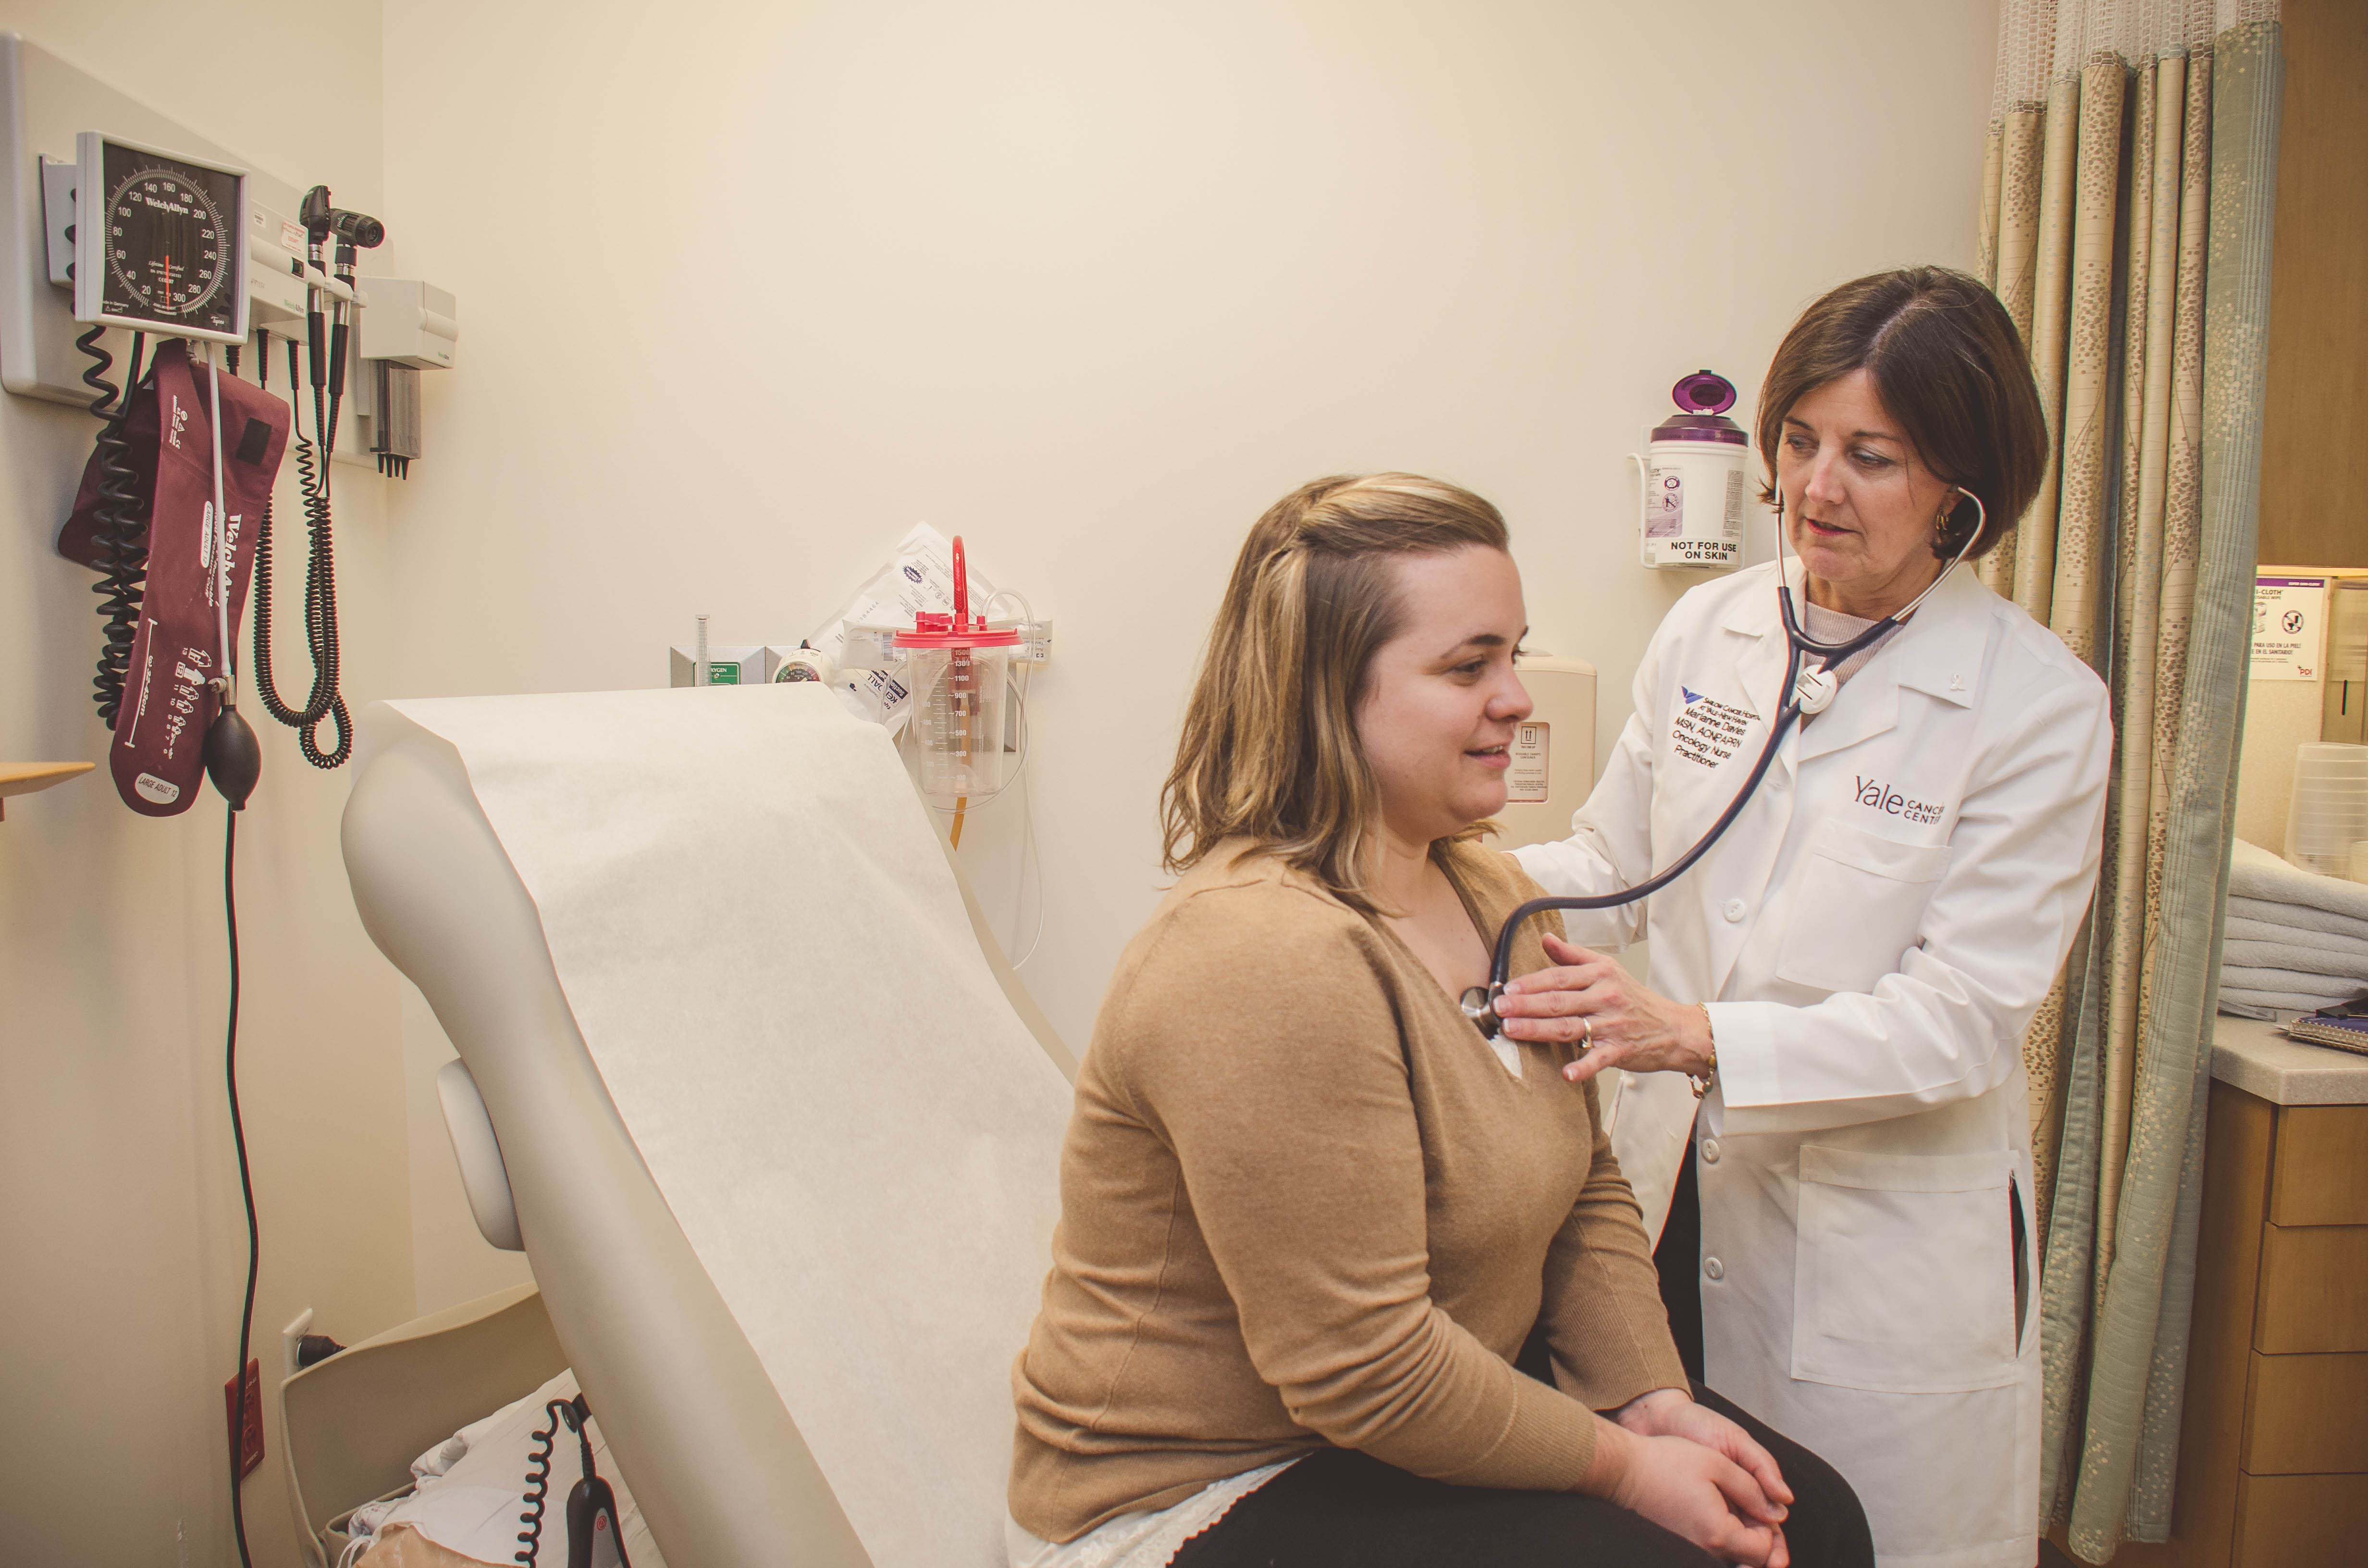 Faculty member Marianne Davies examines a patient at Smilow Cancer Hospital.